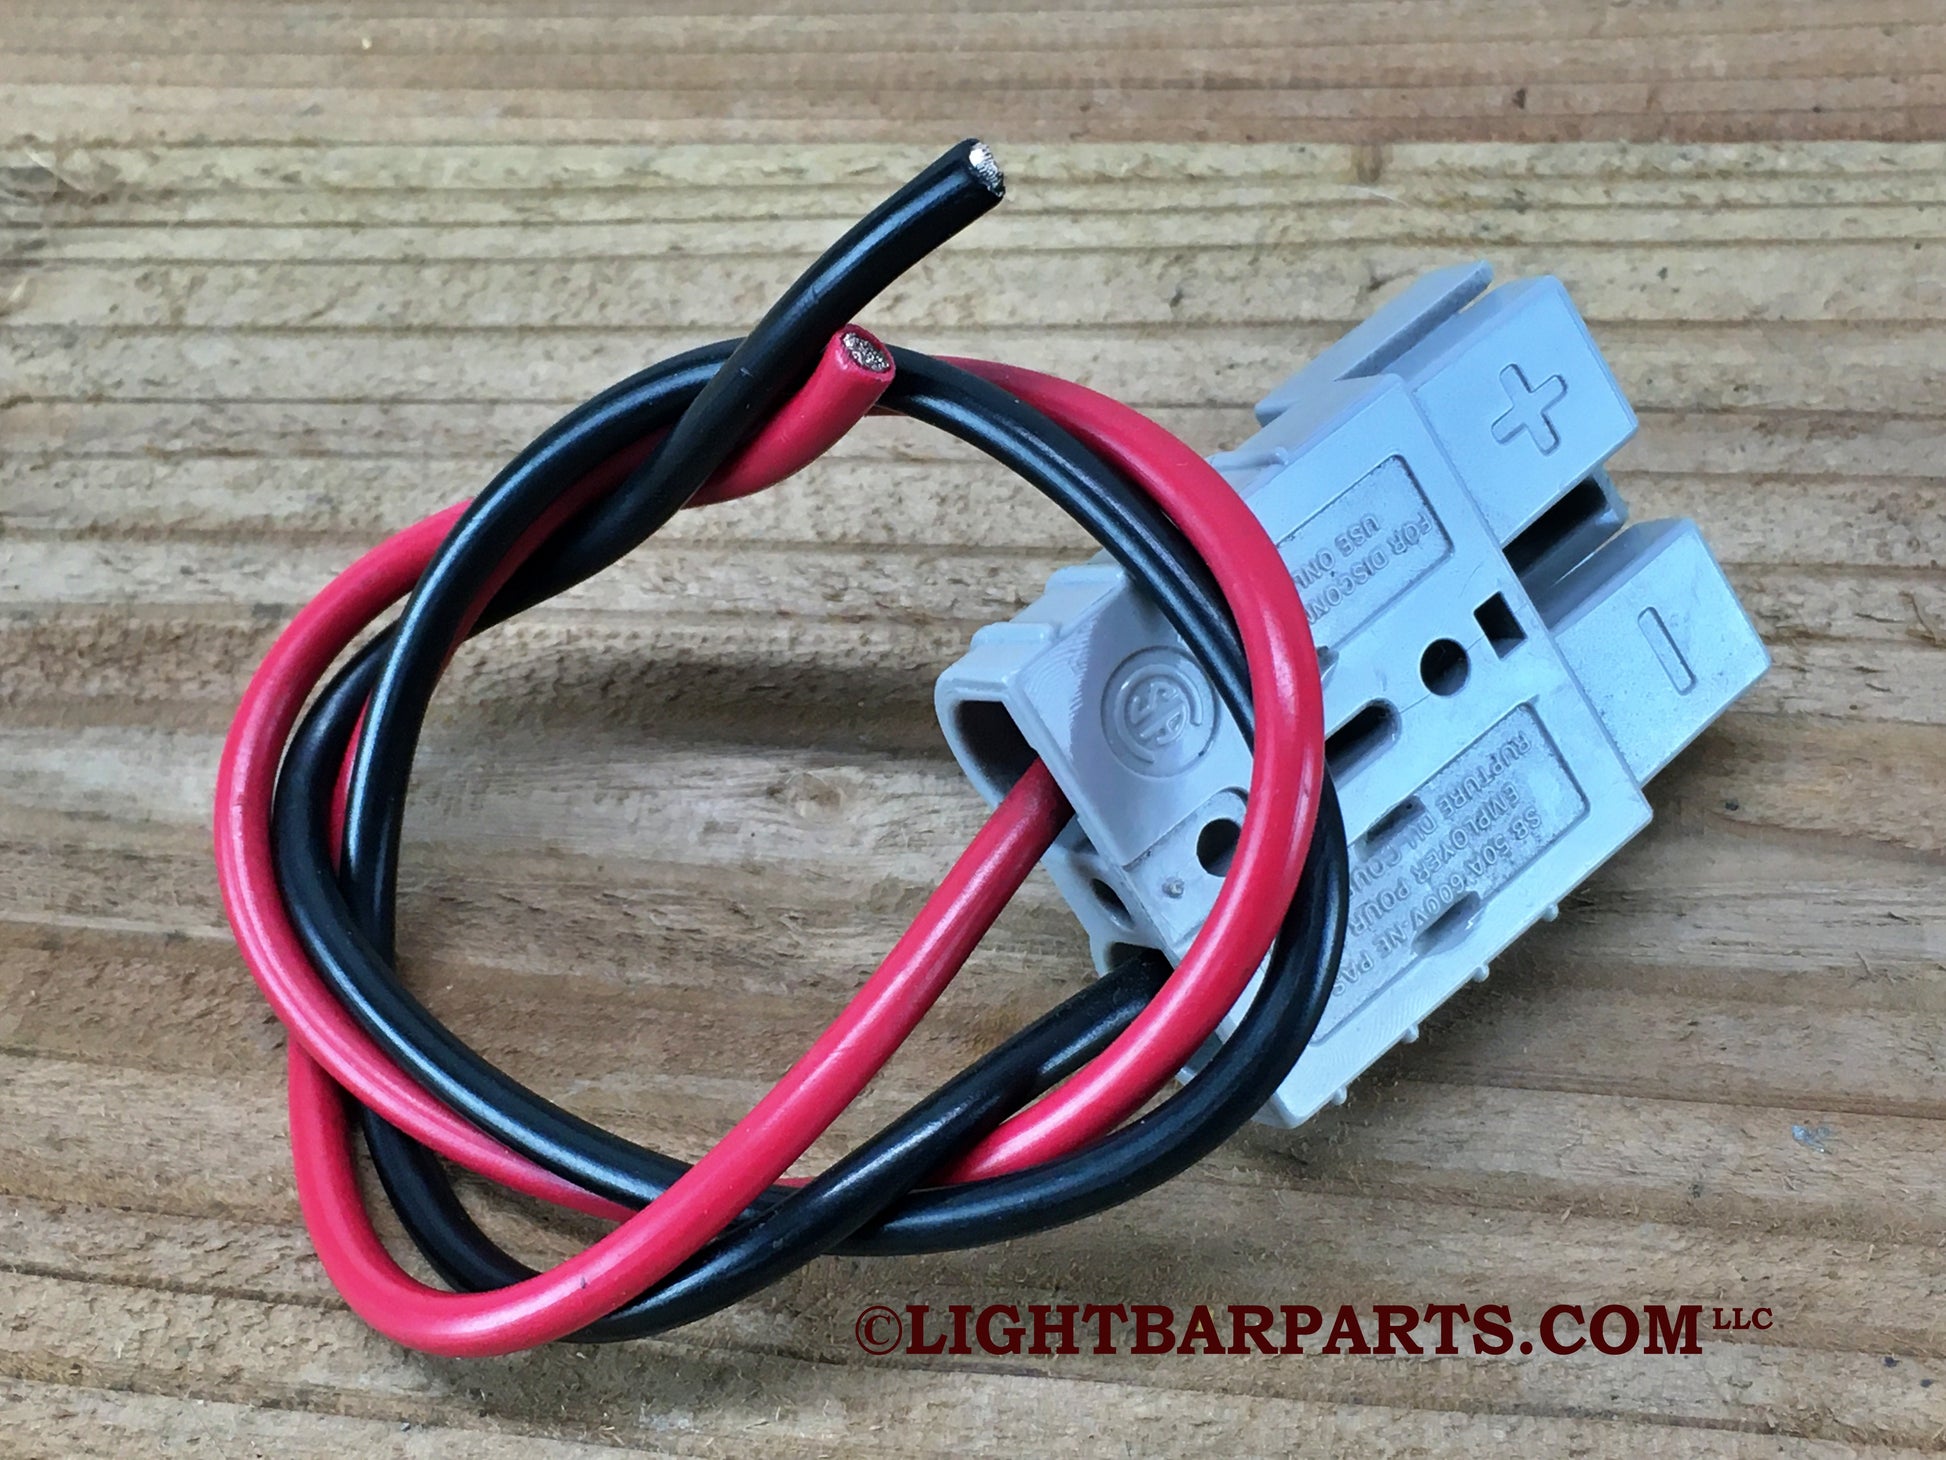 Whelen Liberty Lightbar - Power Cable with Connector 14 Inches Long - lightbarparts.com